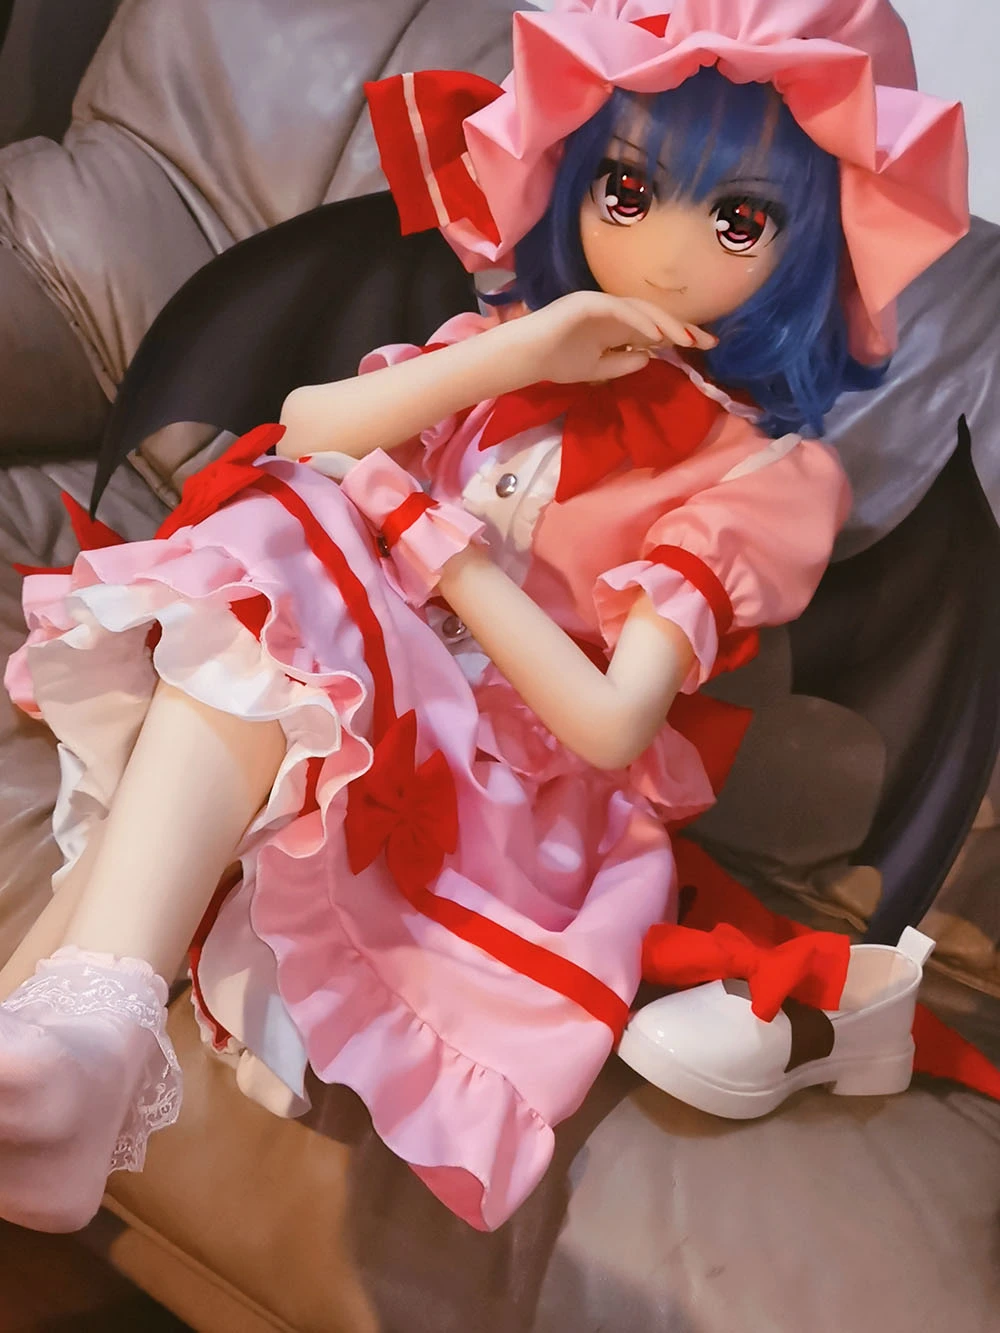 135cm Small Anime Sex Dolls Touhou Project Remilia Scarlet